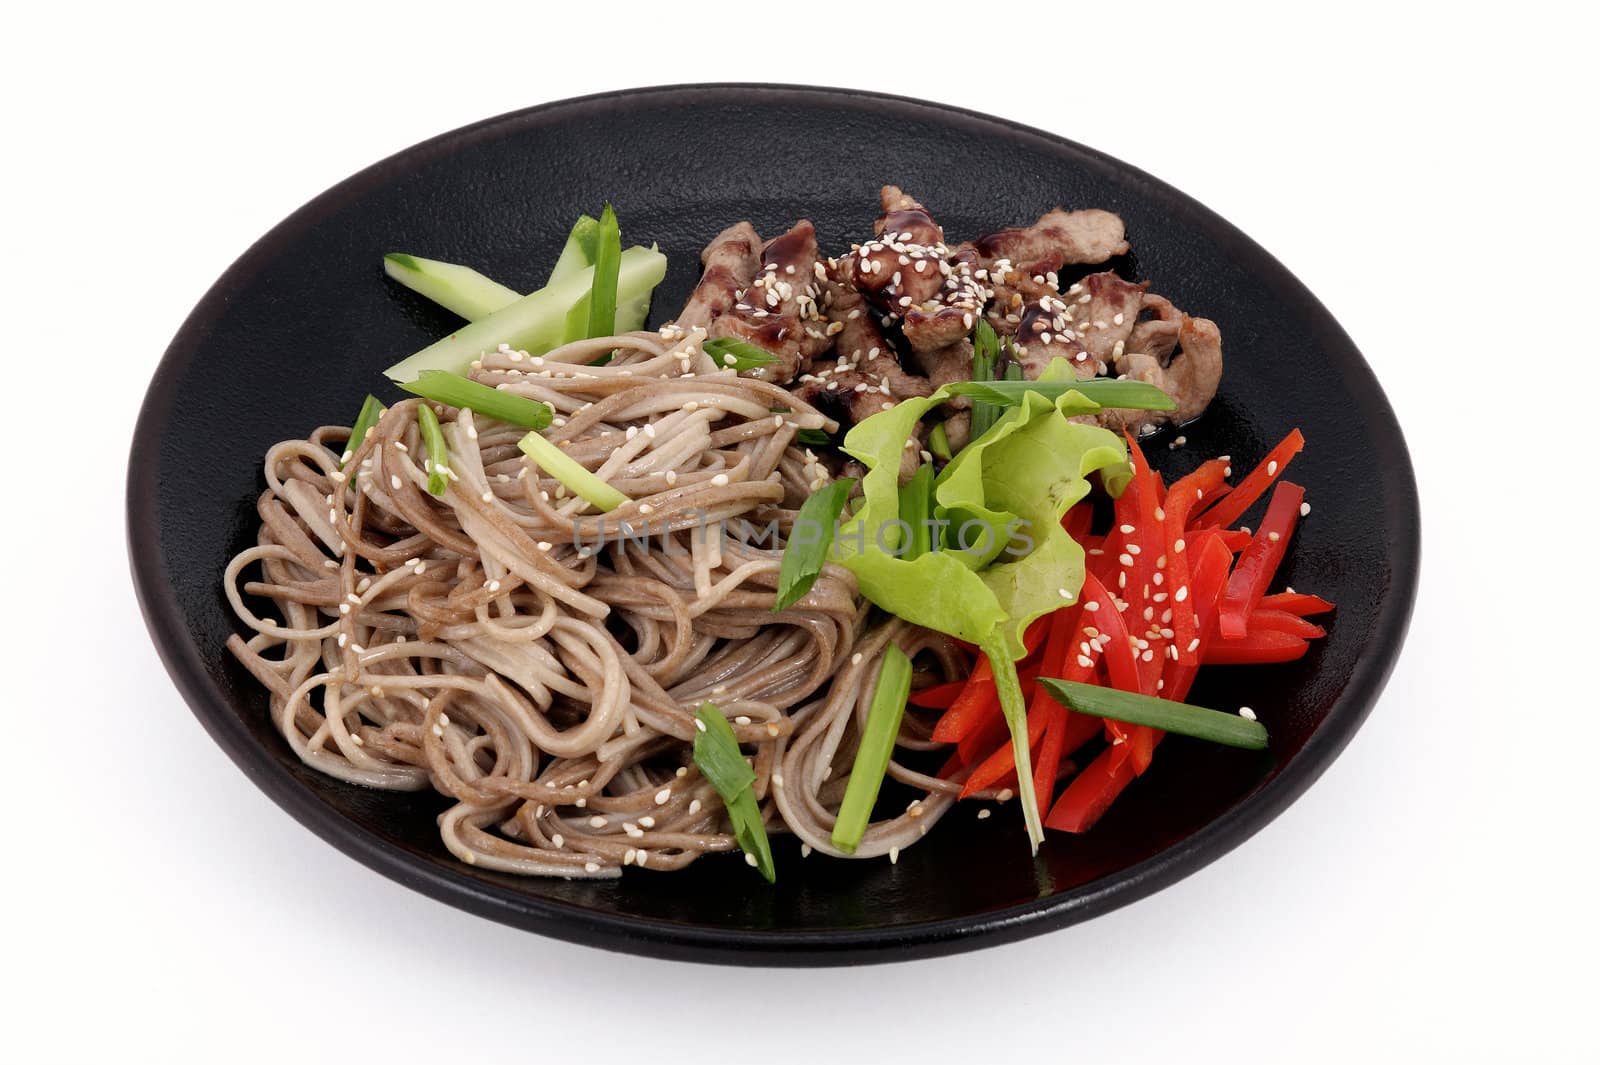 Rice noodles with meat, sweet pepper and green onions